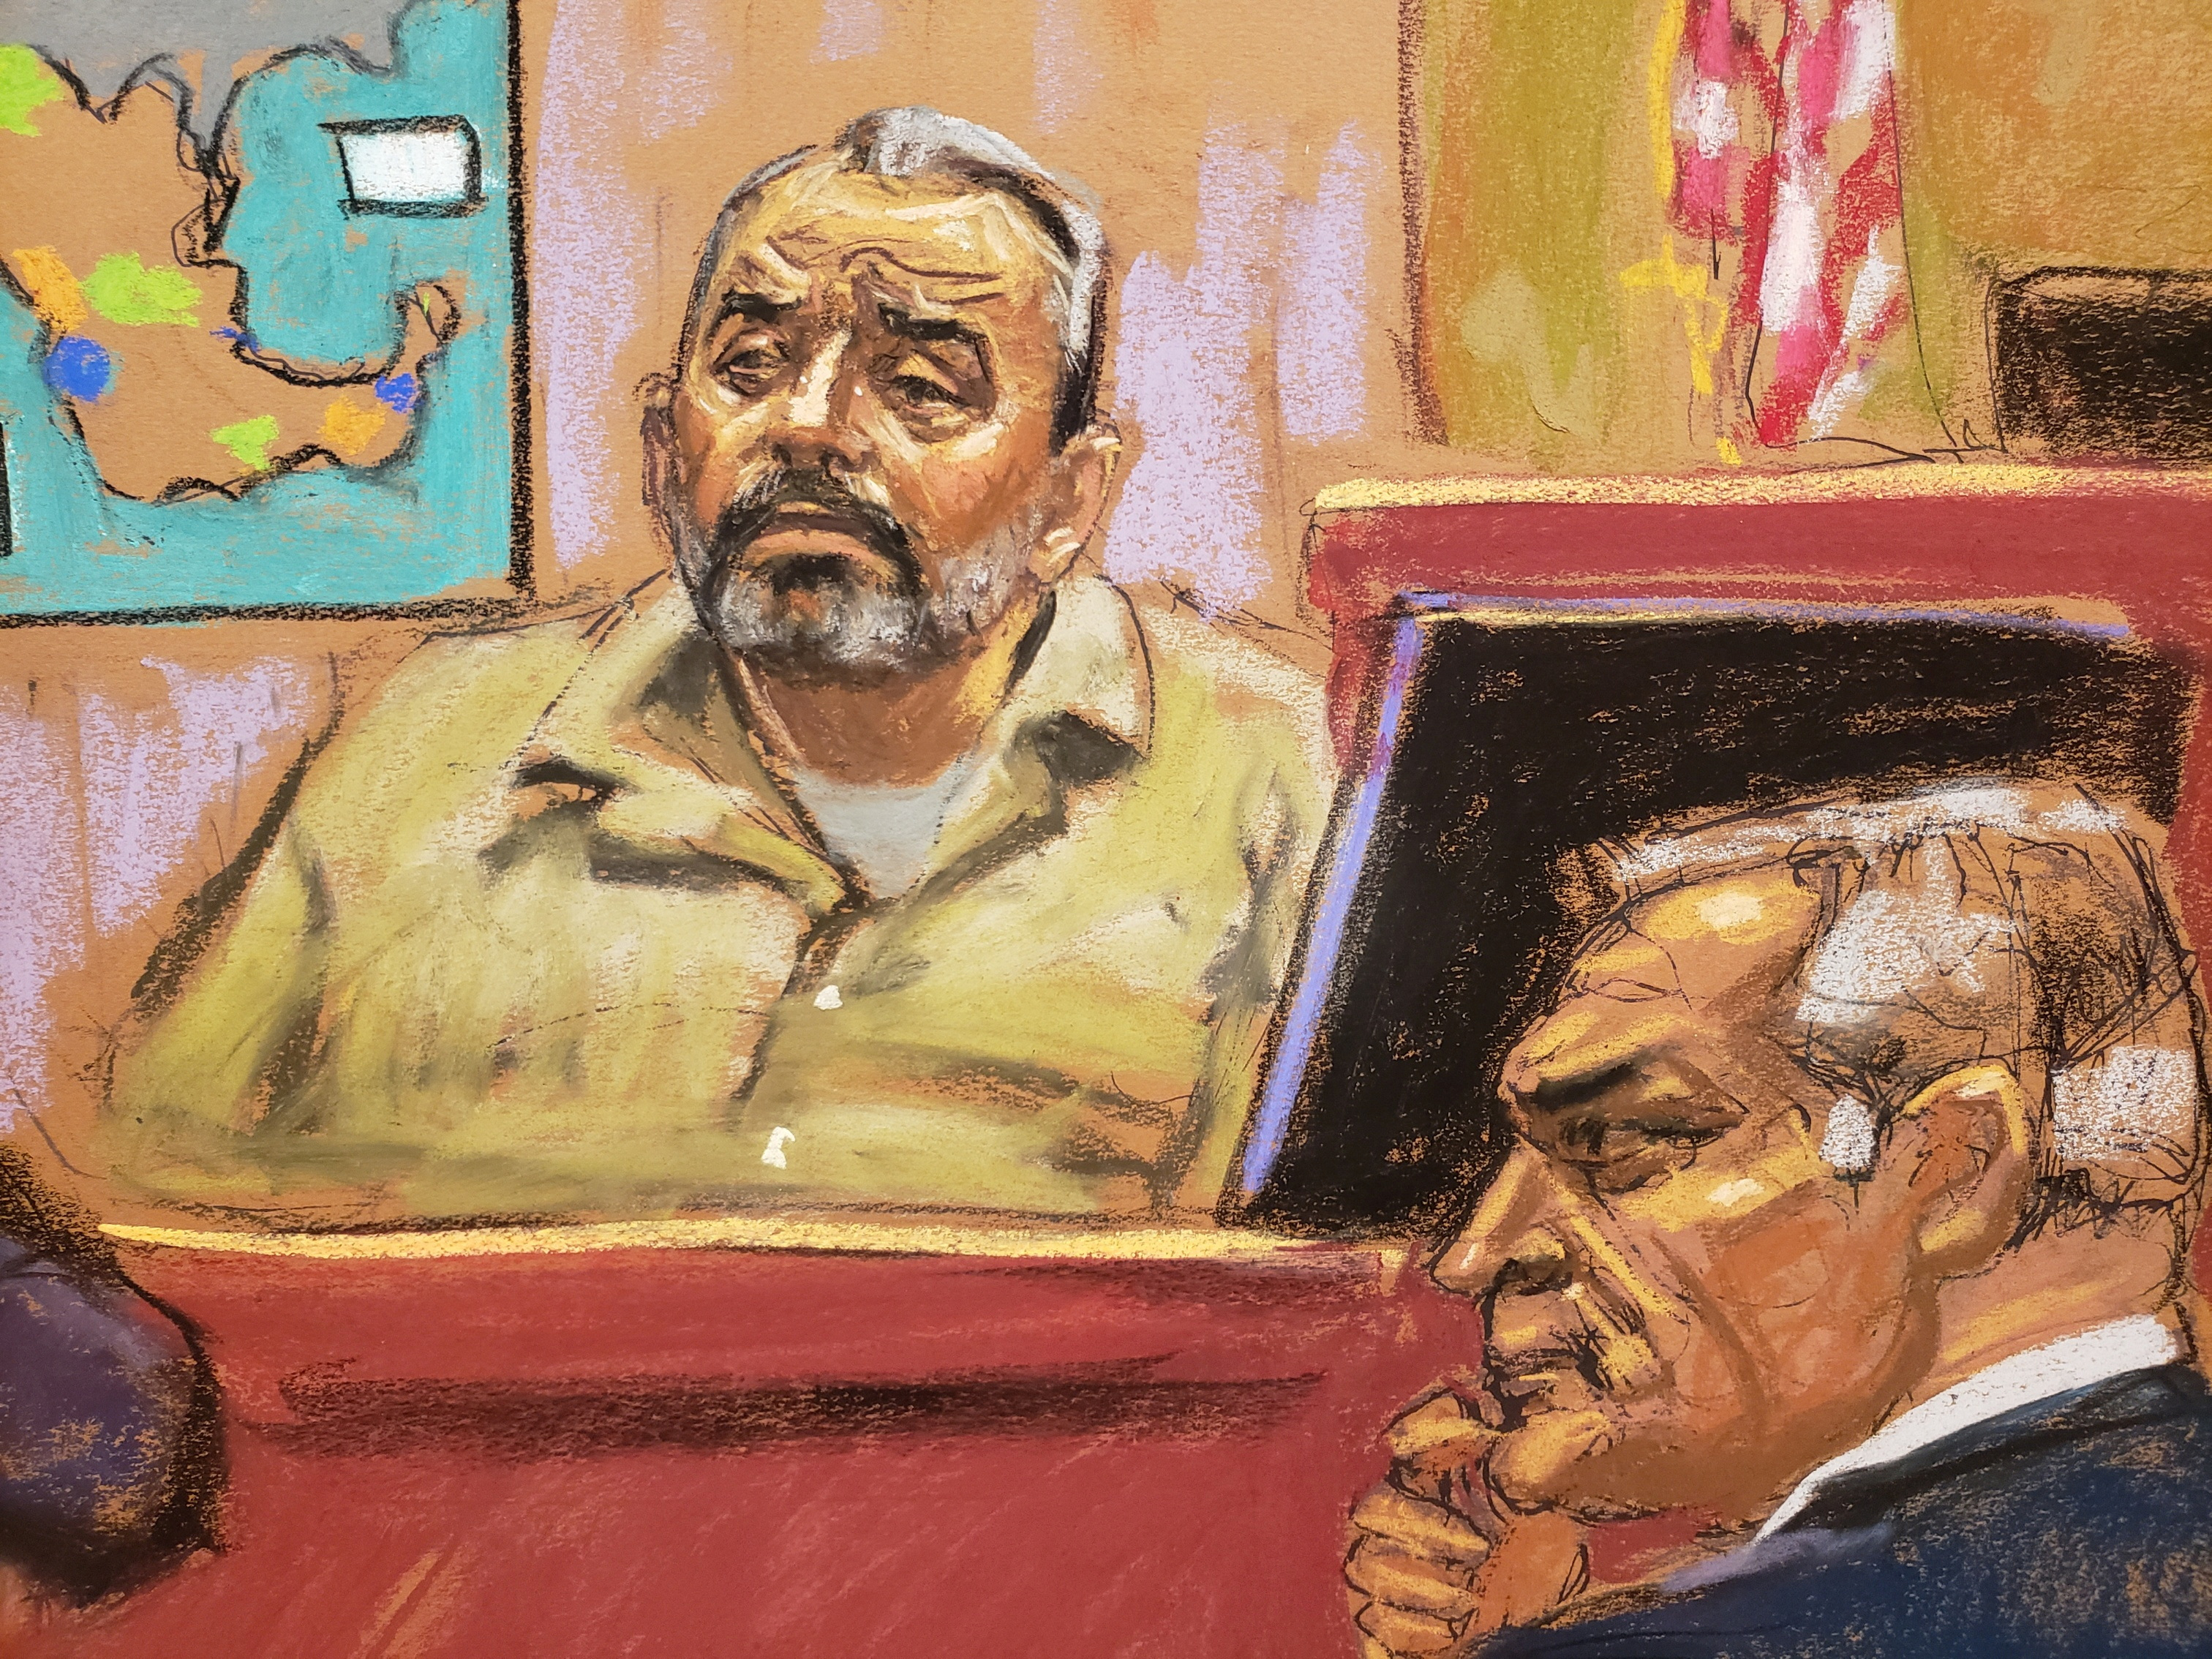 Edgar Veytia is questioned by Saritha Komatireddy (not seen) during the trial of Mexico's former Public Security Minister Genaro Garcia Luna on charges that he accepted millions of dollars to protect the powerful Sinaloa Cartel, once run by imprisoned drug lord Joaquin "El Chapo" Guzman, at a courthouse in New York City, U.S., February 7, 2023 in this courtroom sketch. REUTERS/Jane Rosenberg